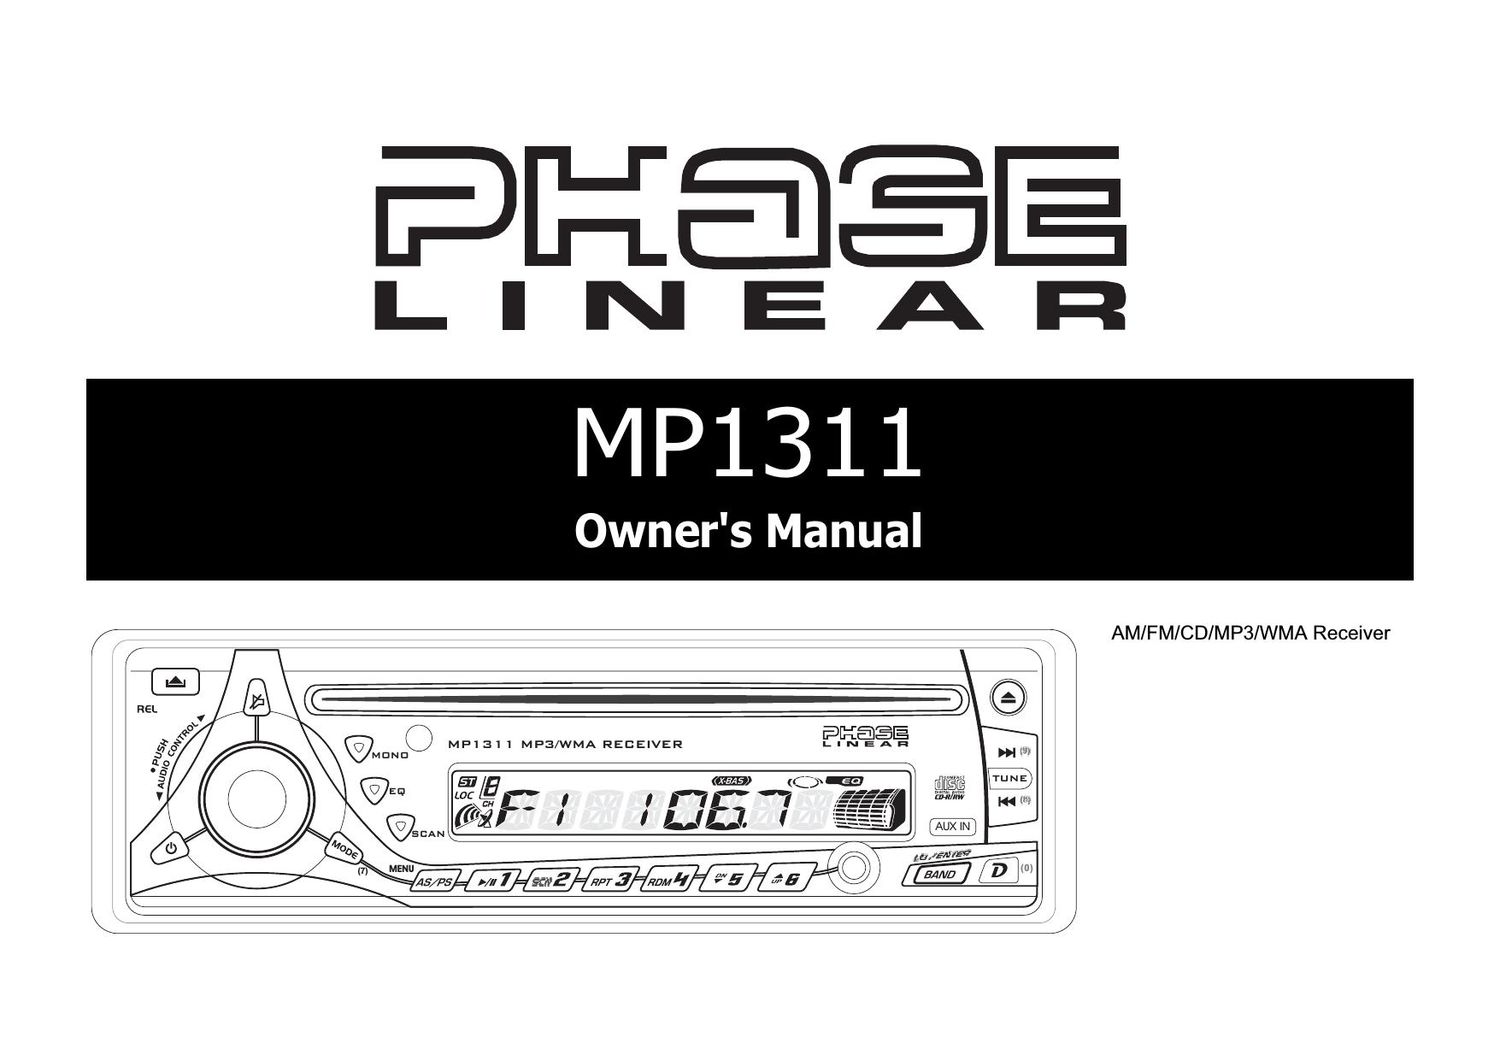 Phase Linear MP 1311 Owners Manual